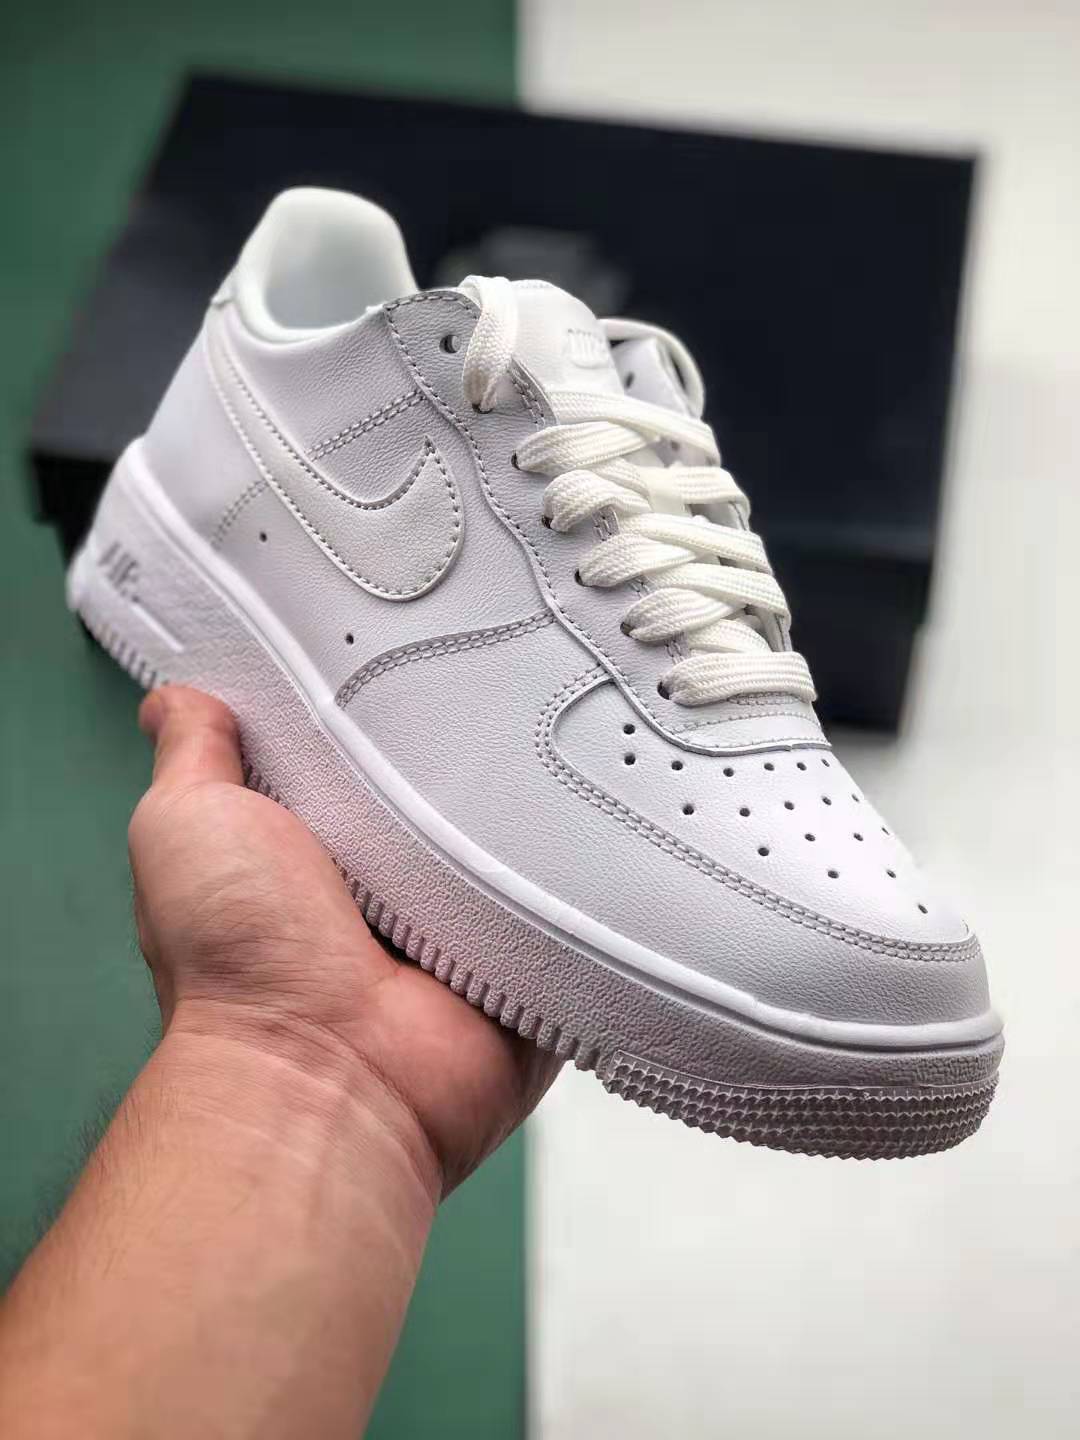 Nike Air Force 1 Ultraforce Leather 'White' 845052-101 - Premium Lightweight Sneakers for Men